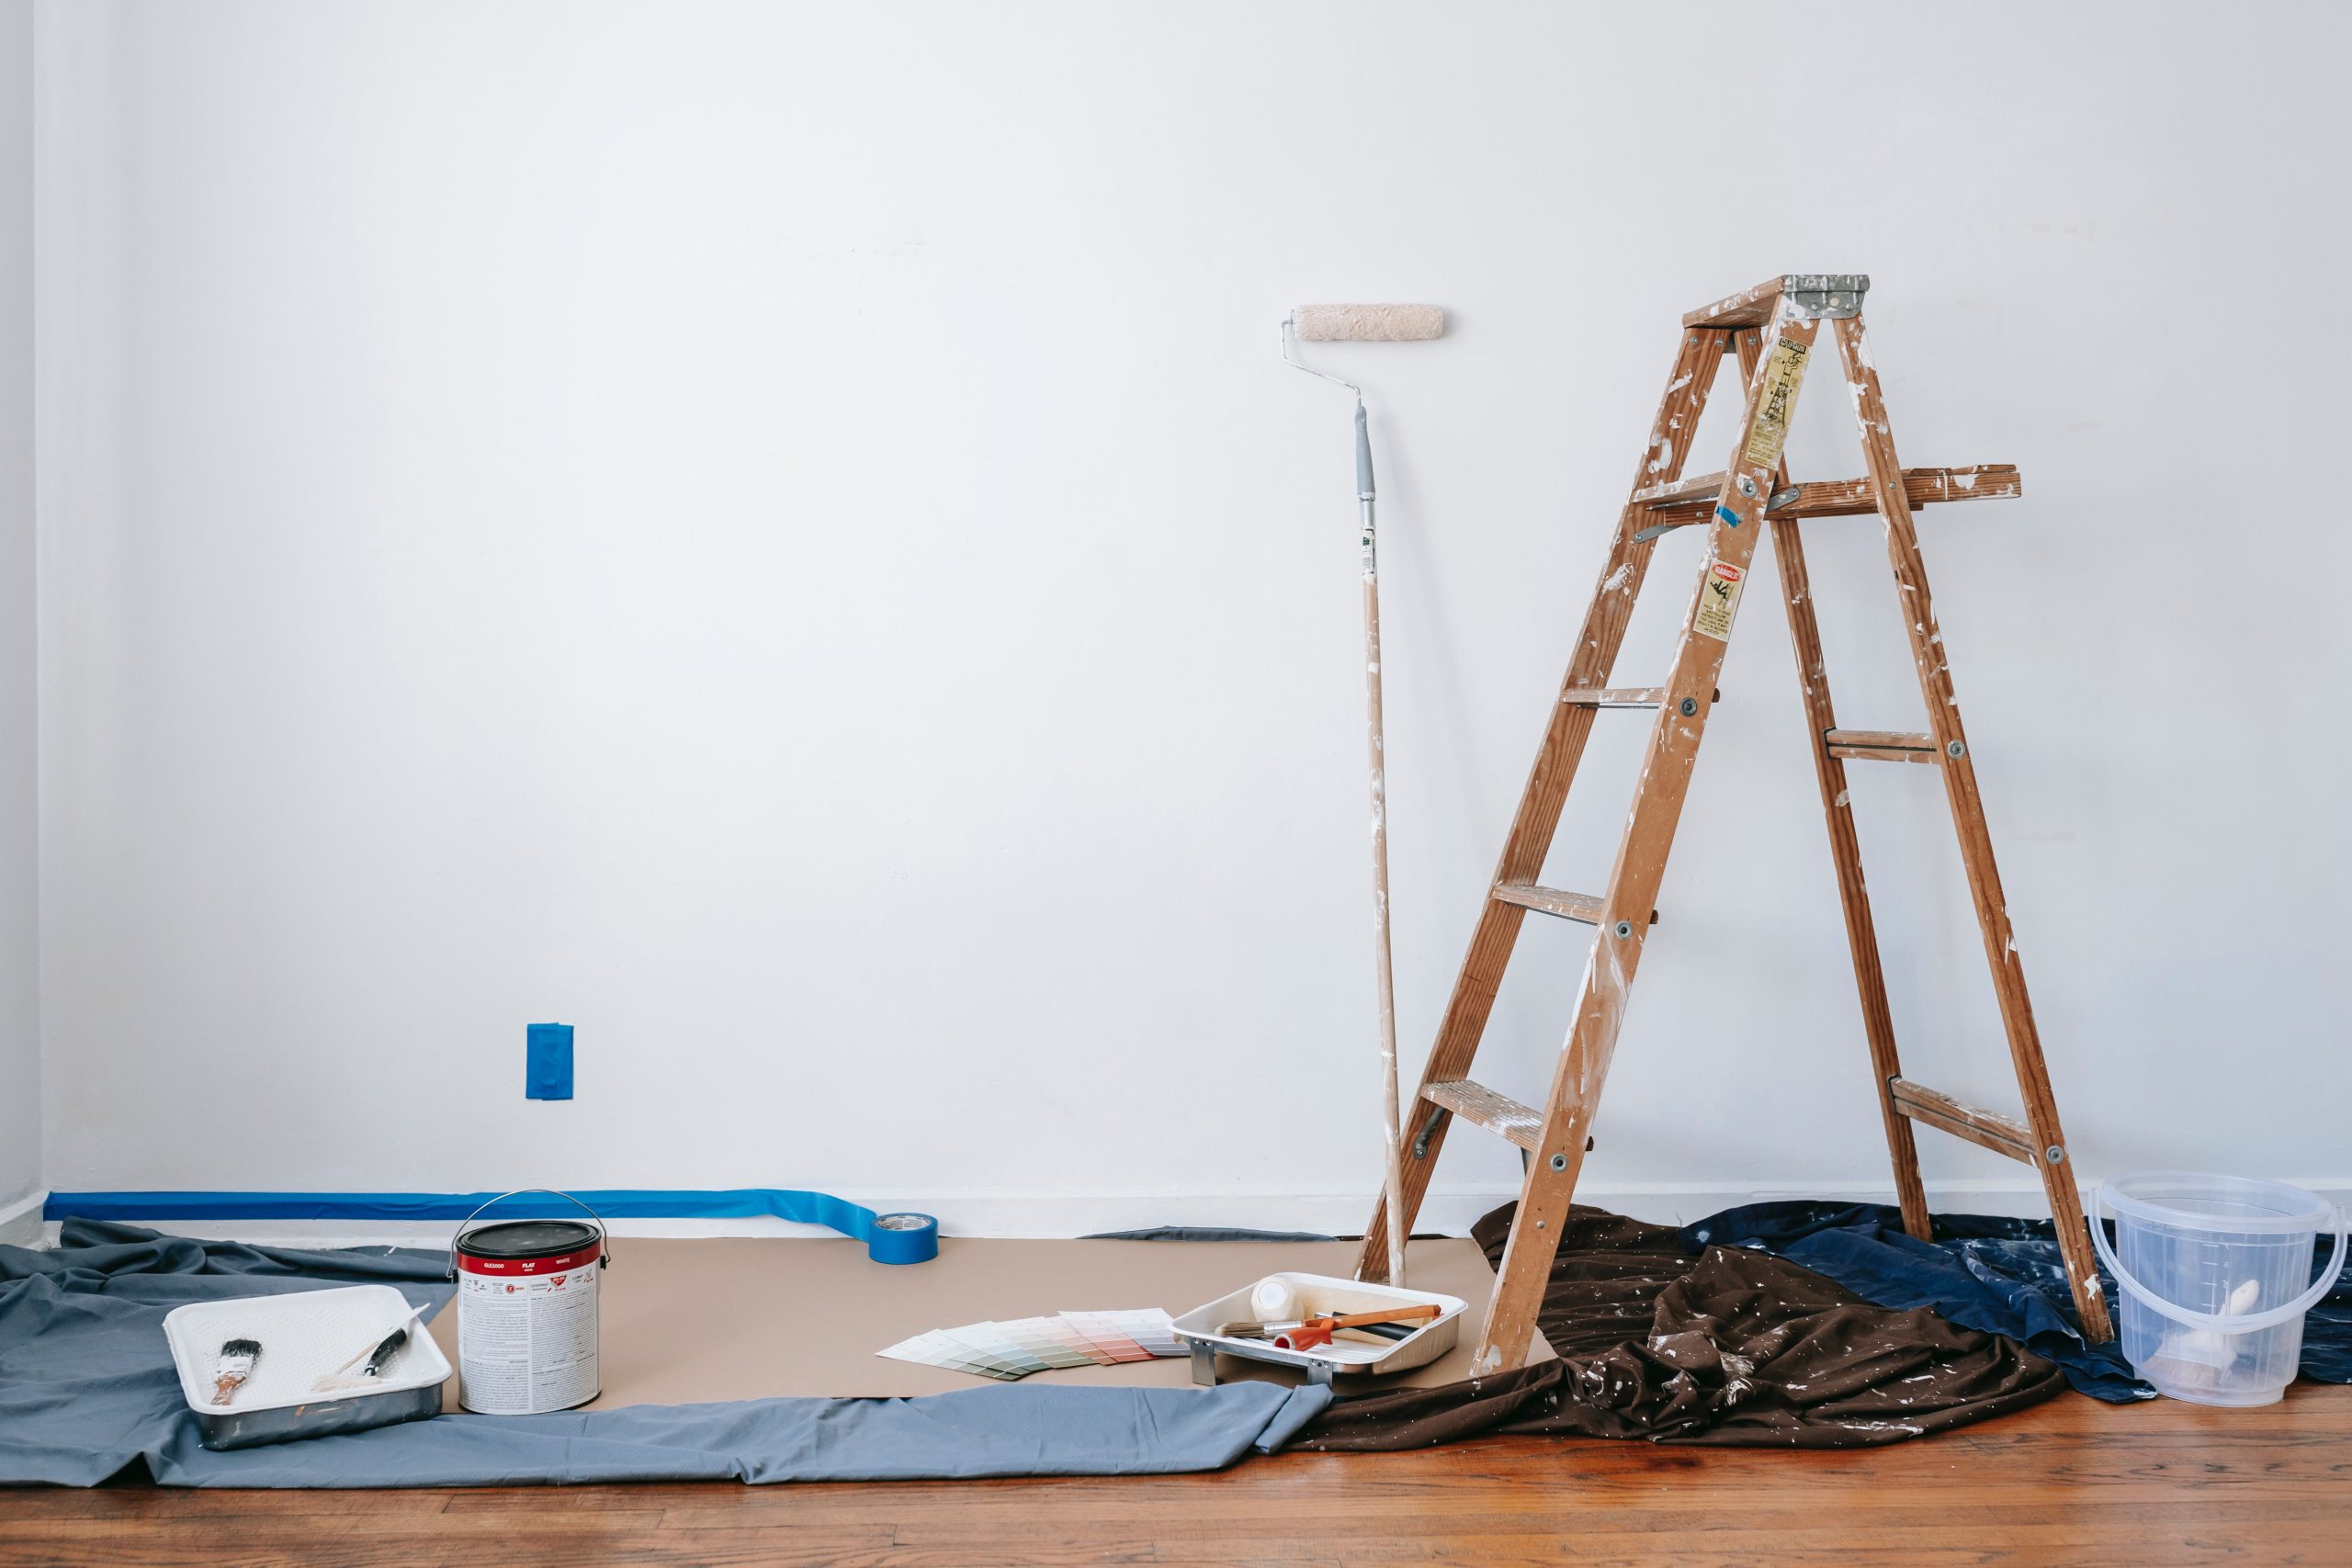 Should You Be Remodeling?